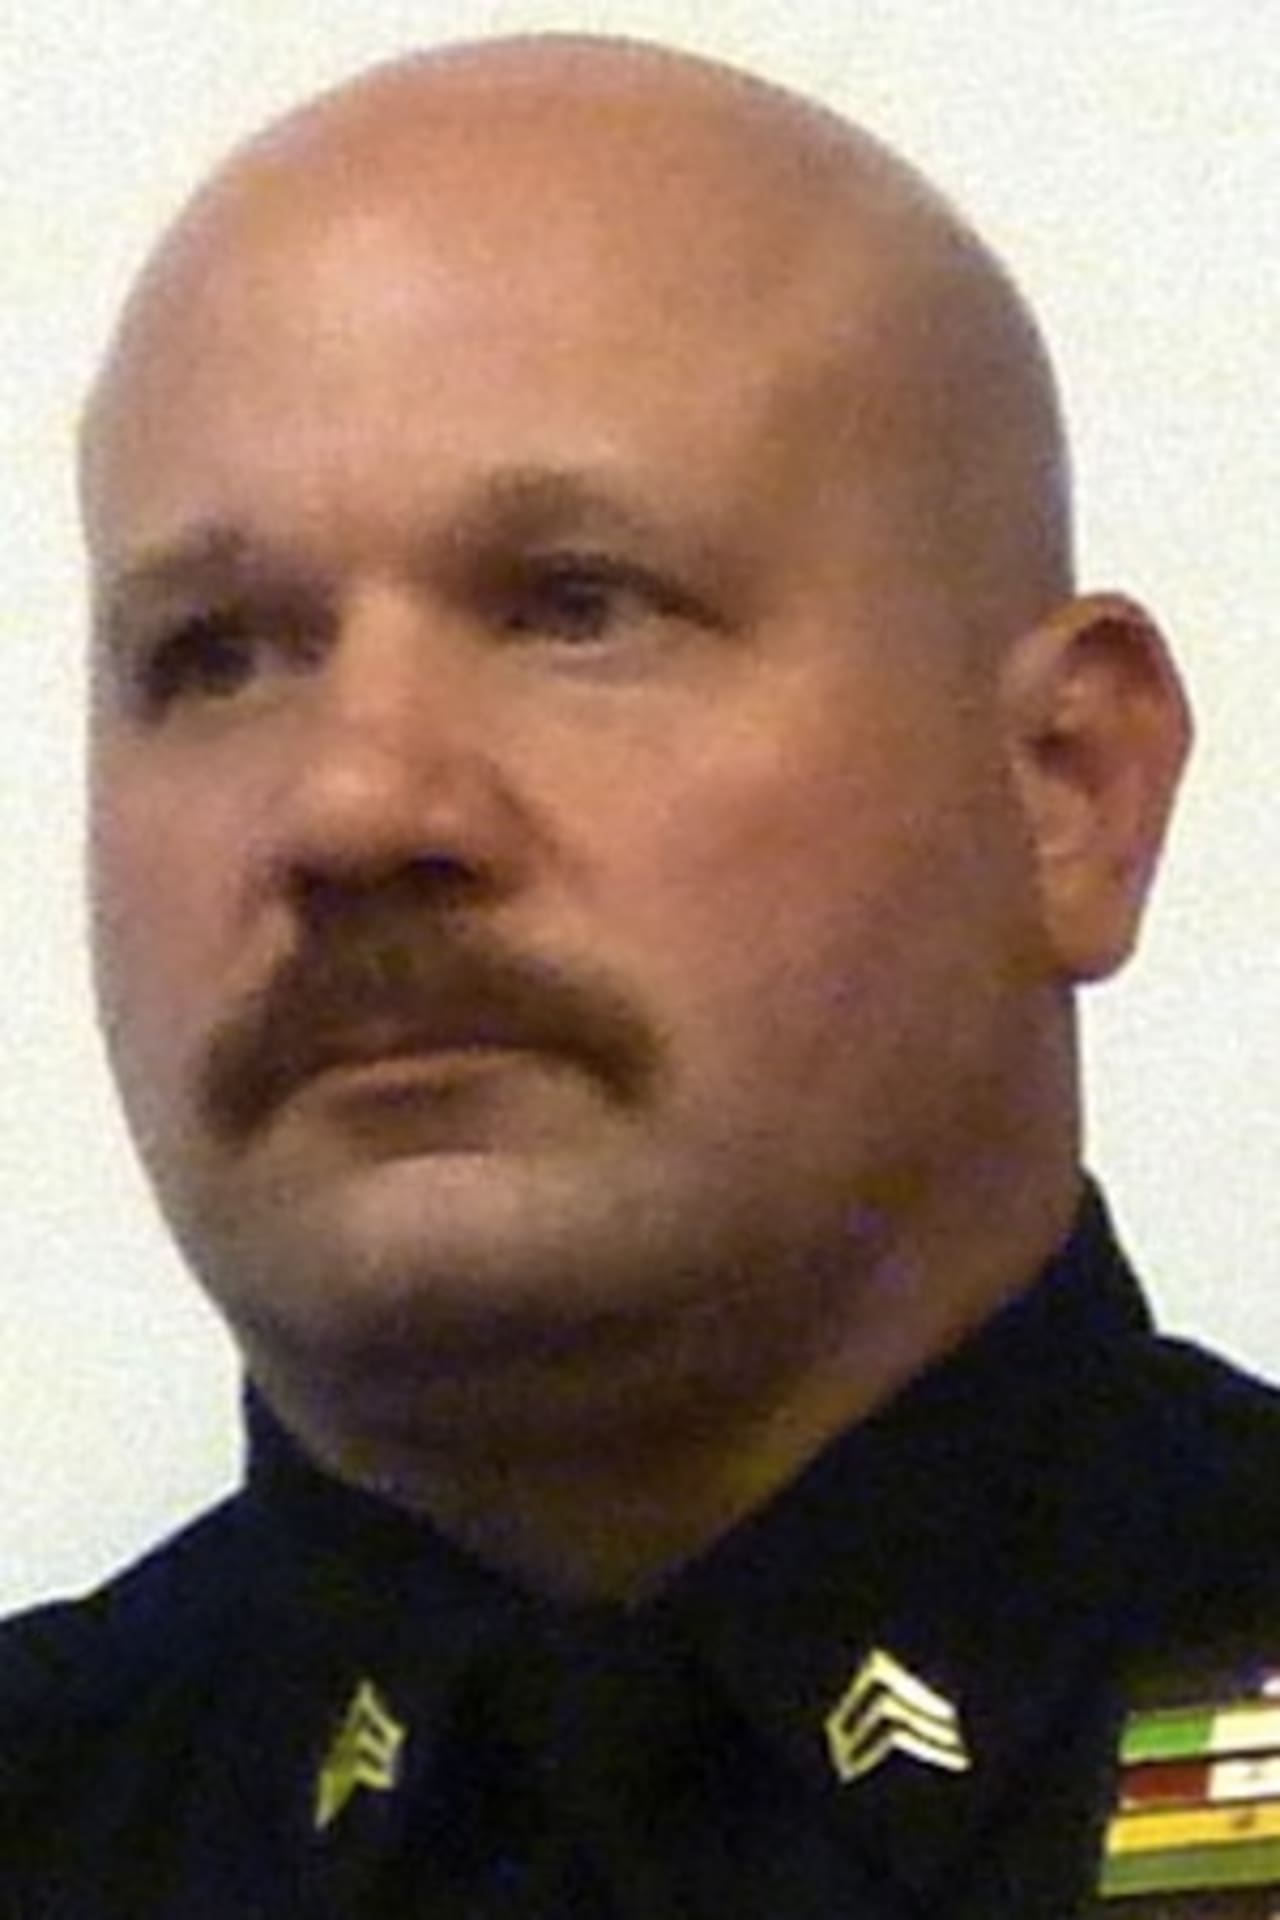 Harrison Police Lt. Vito Castellano accidentally fired his weapon while stopping three burglary suspects in October.